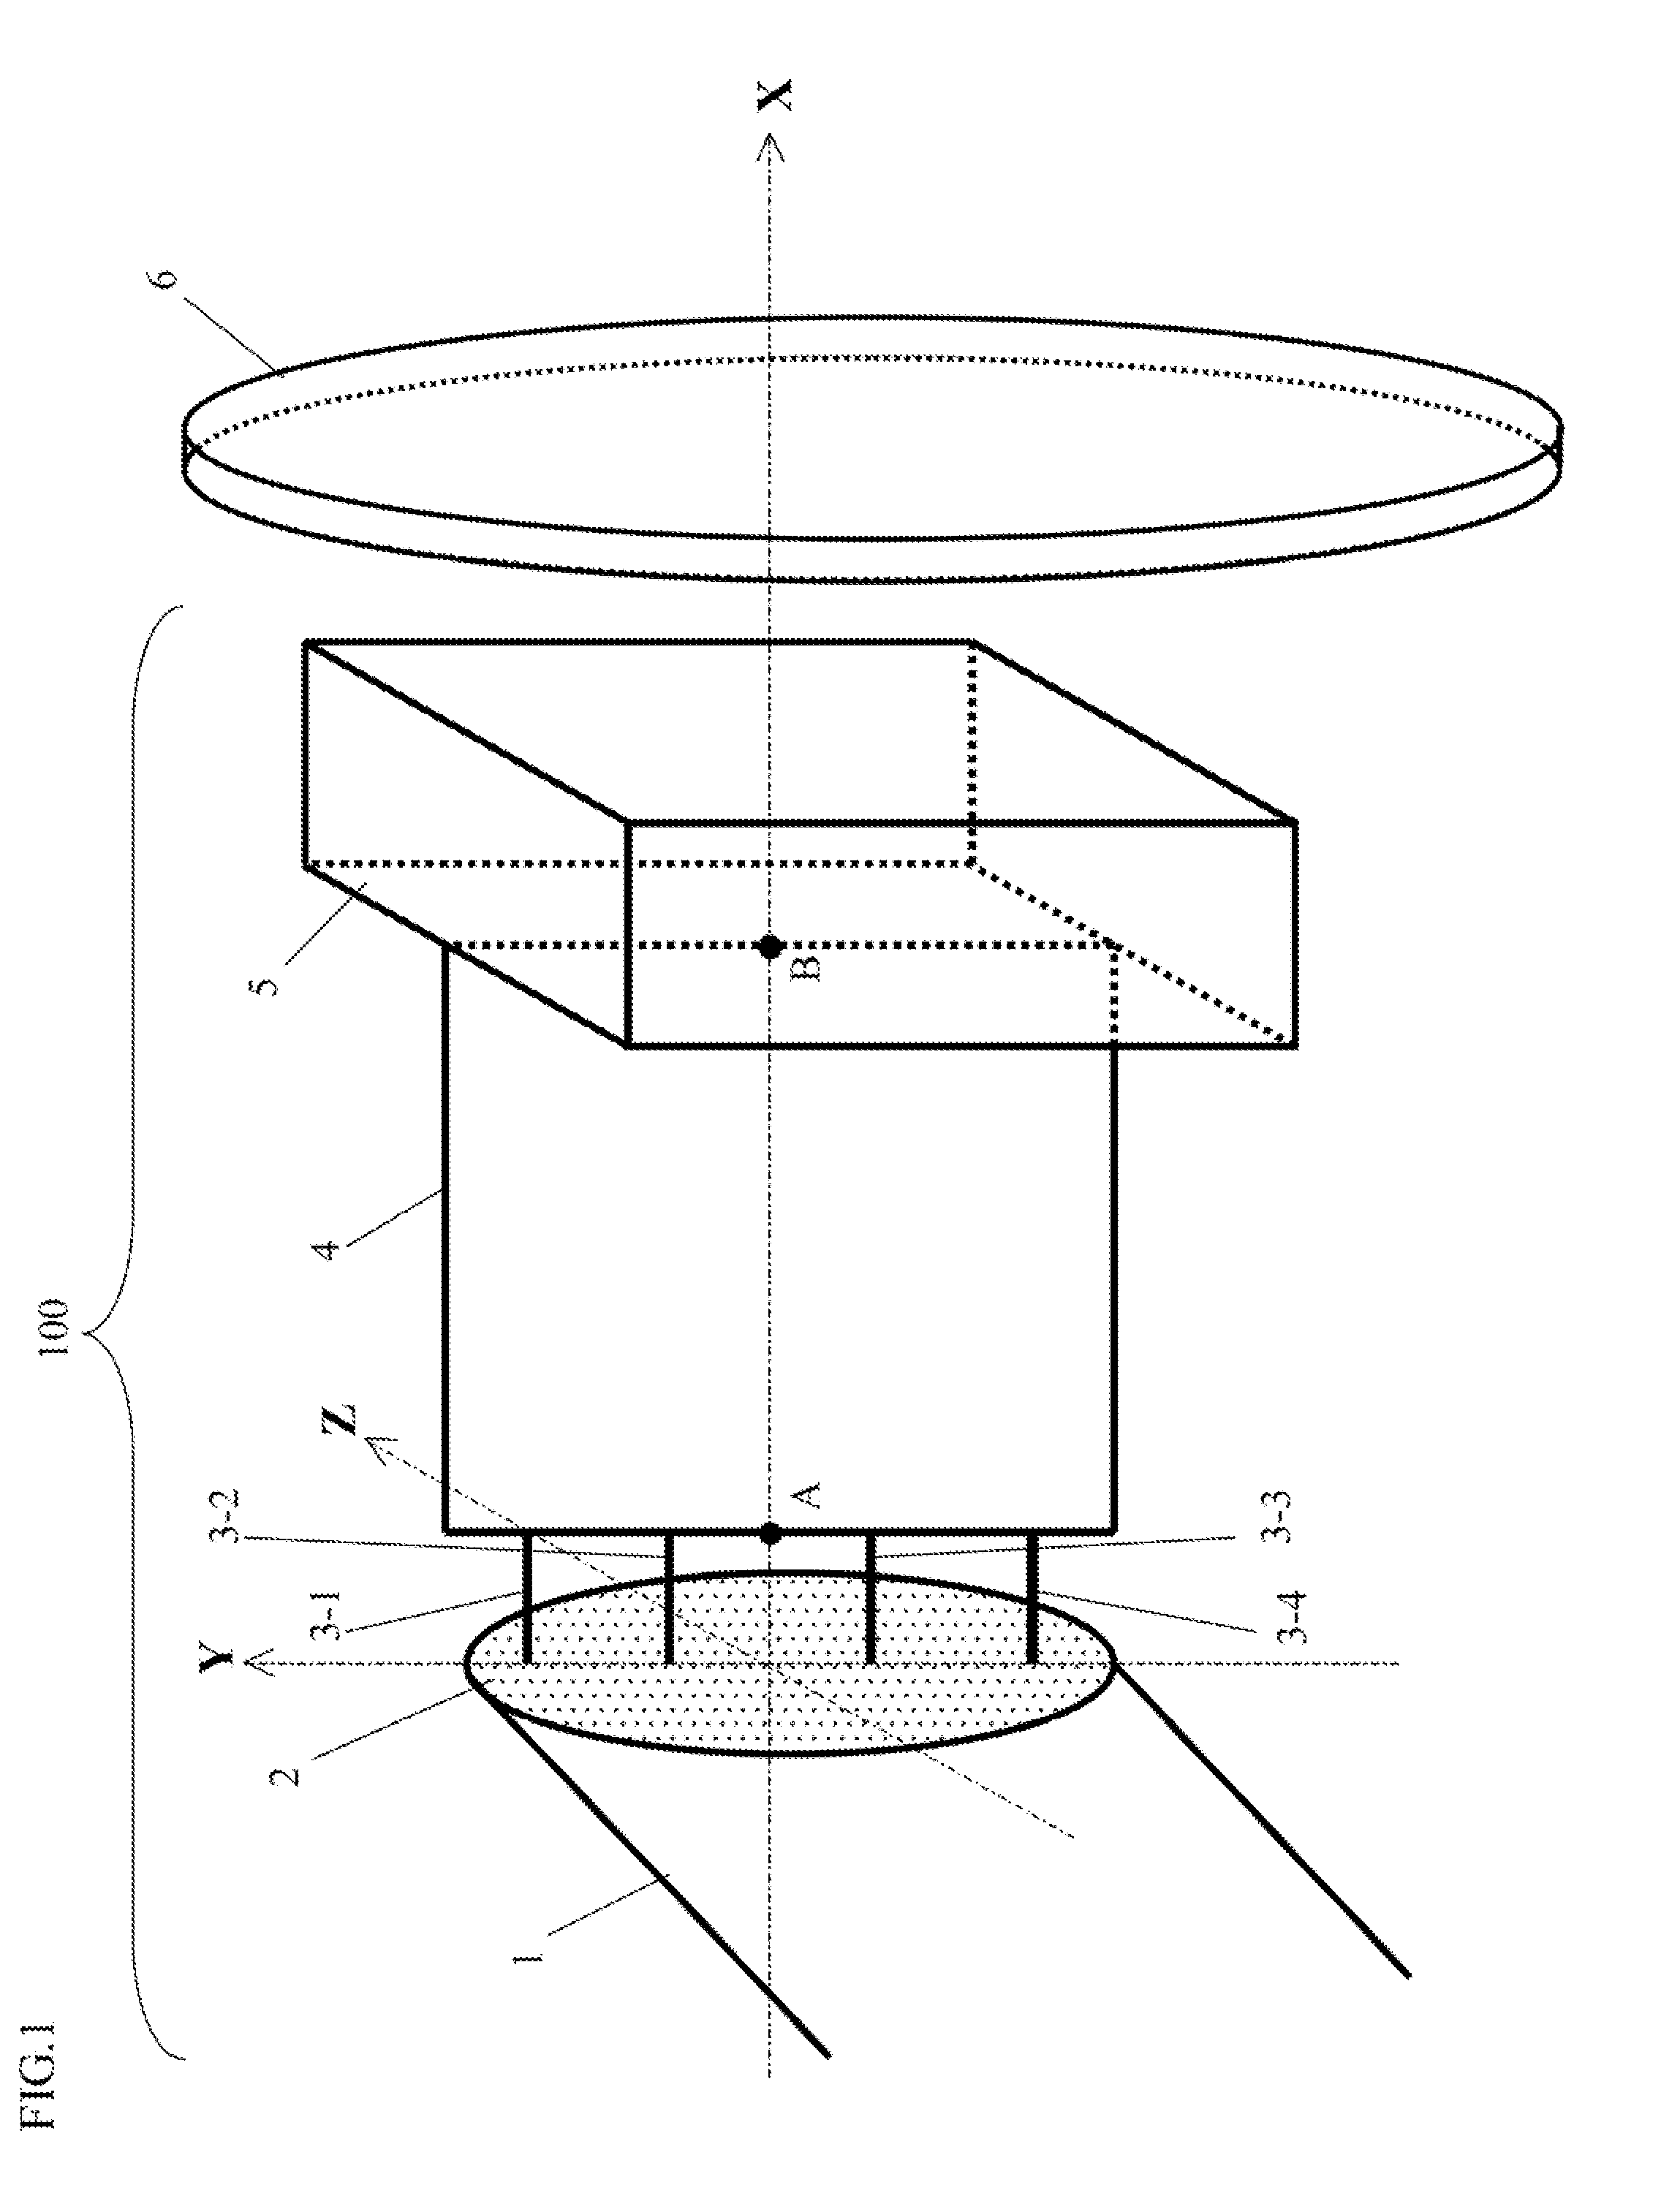 Very small spot-size light beam forming apparatus